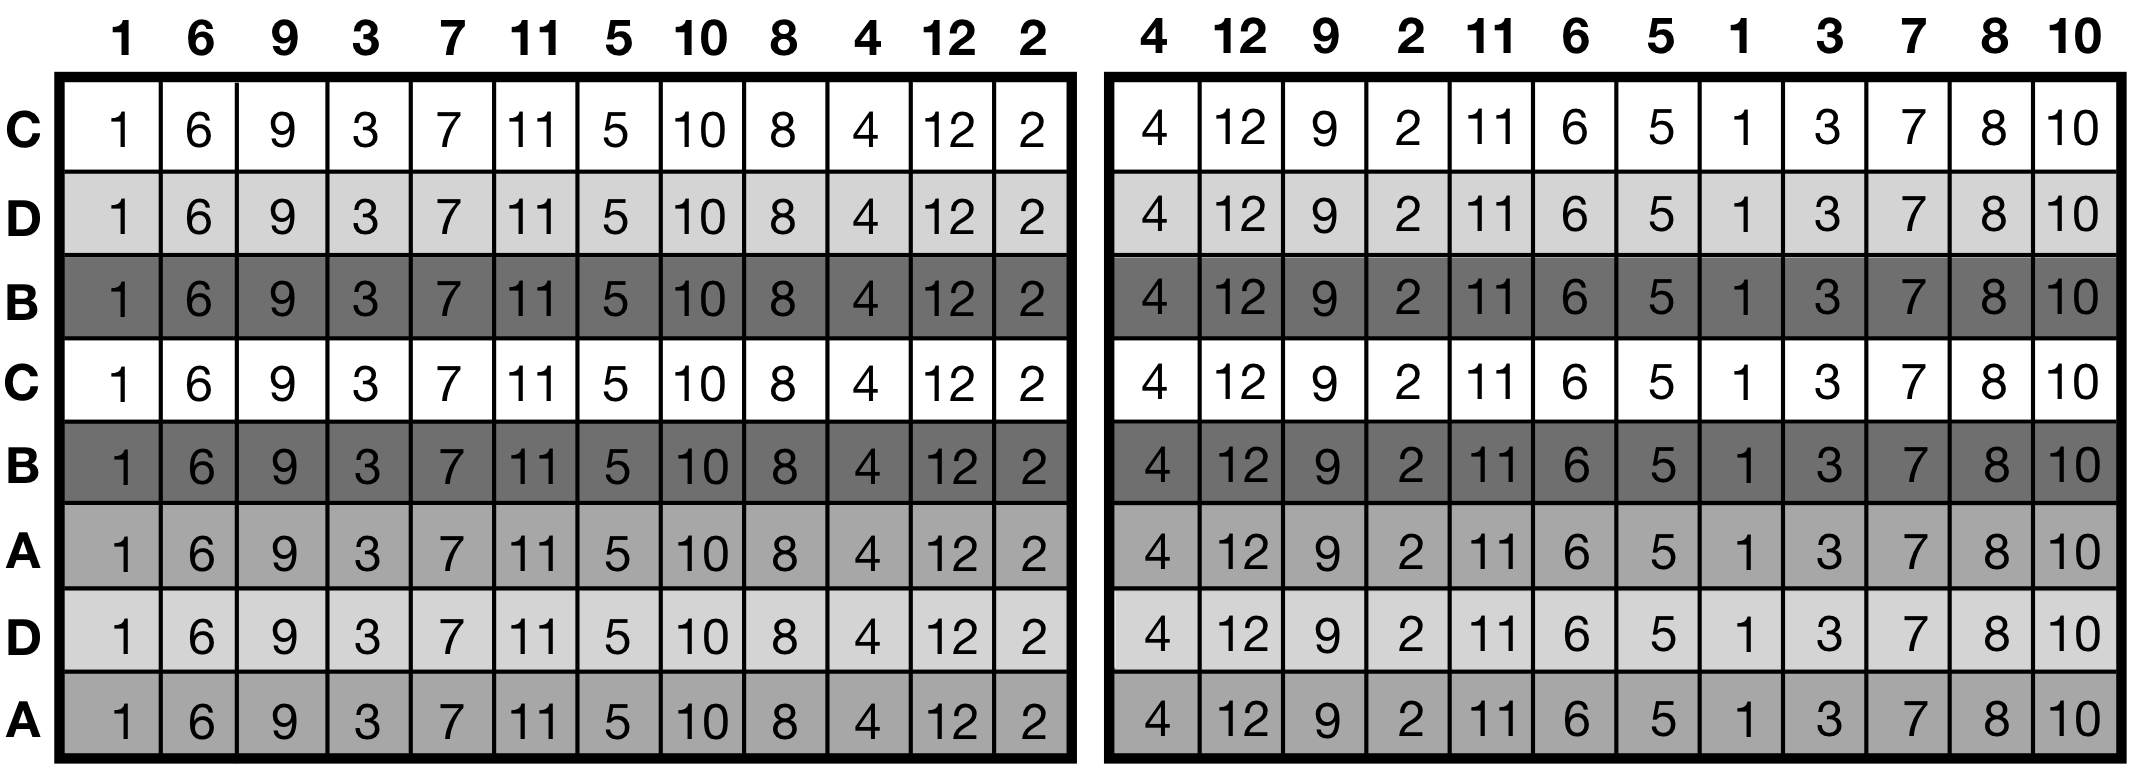 Criss-cross experiment layout: two replicates of four drugs (background shade) randomized on rows, dilutions (numbers) randomized on columns. Two replicate plates shown, randomization of rows kept constant while dilutions are randomized independently.